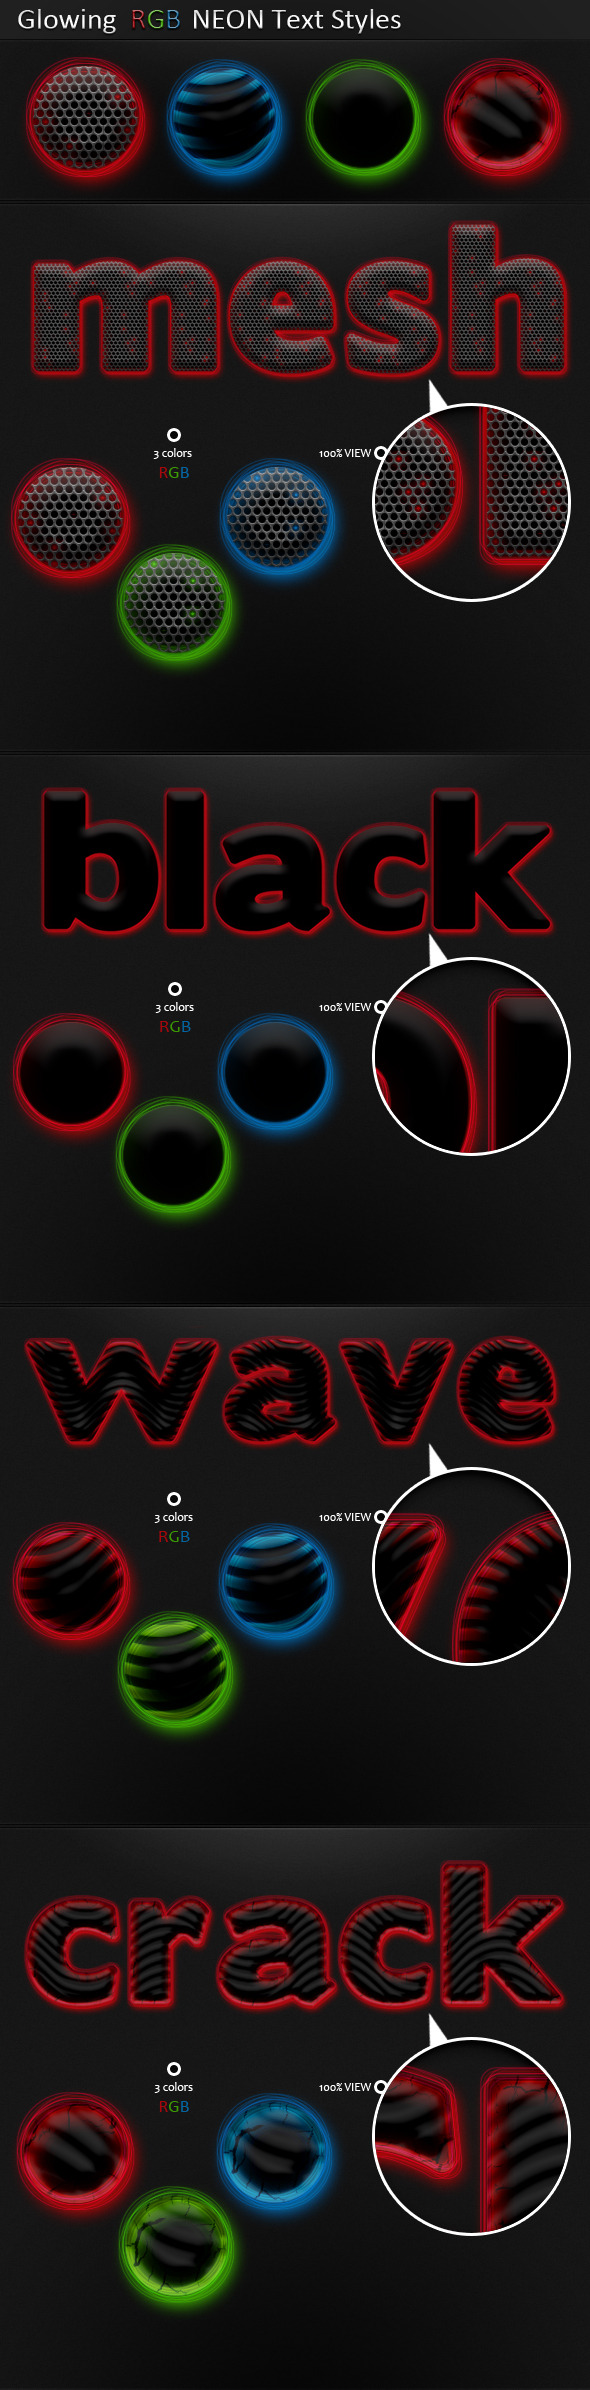 Glowing RGB NEON Text Styles